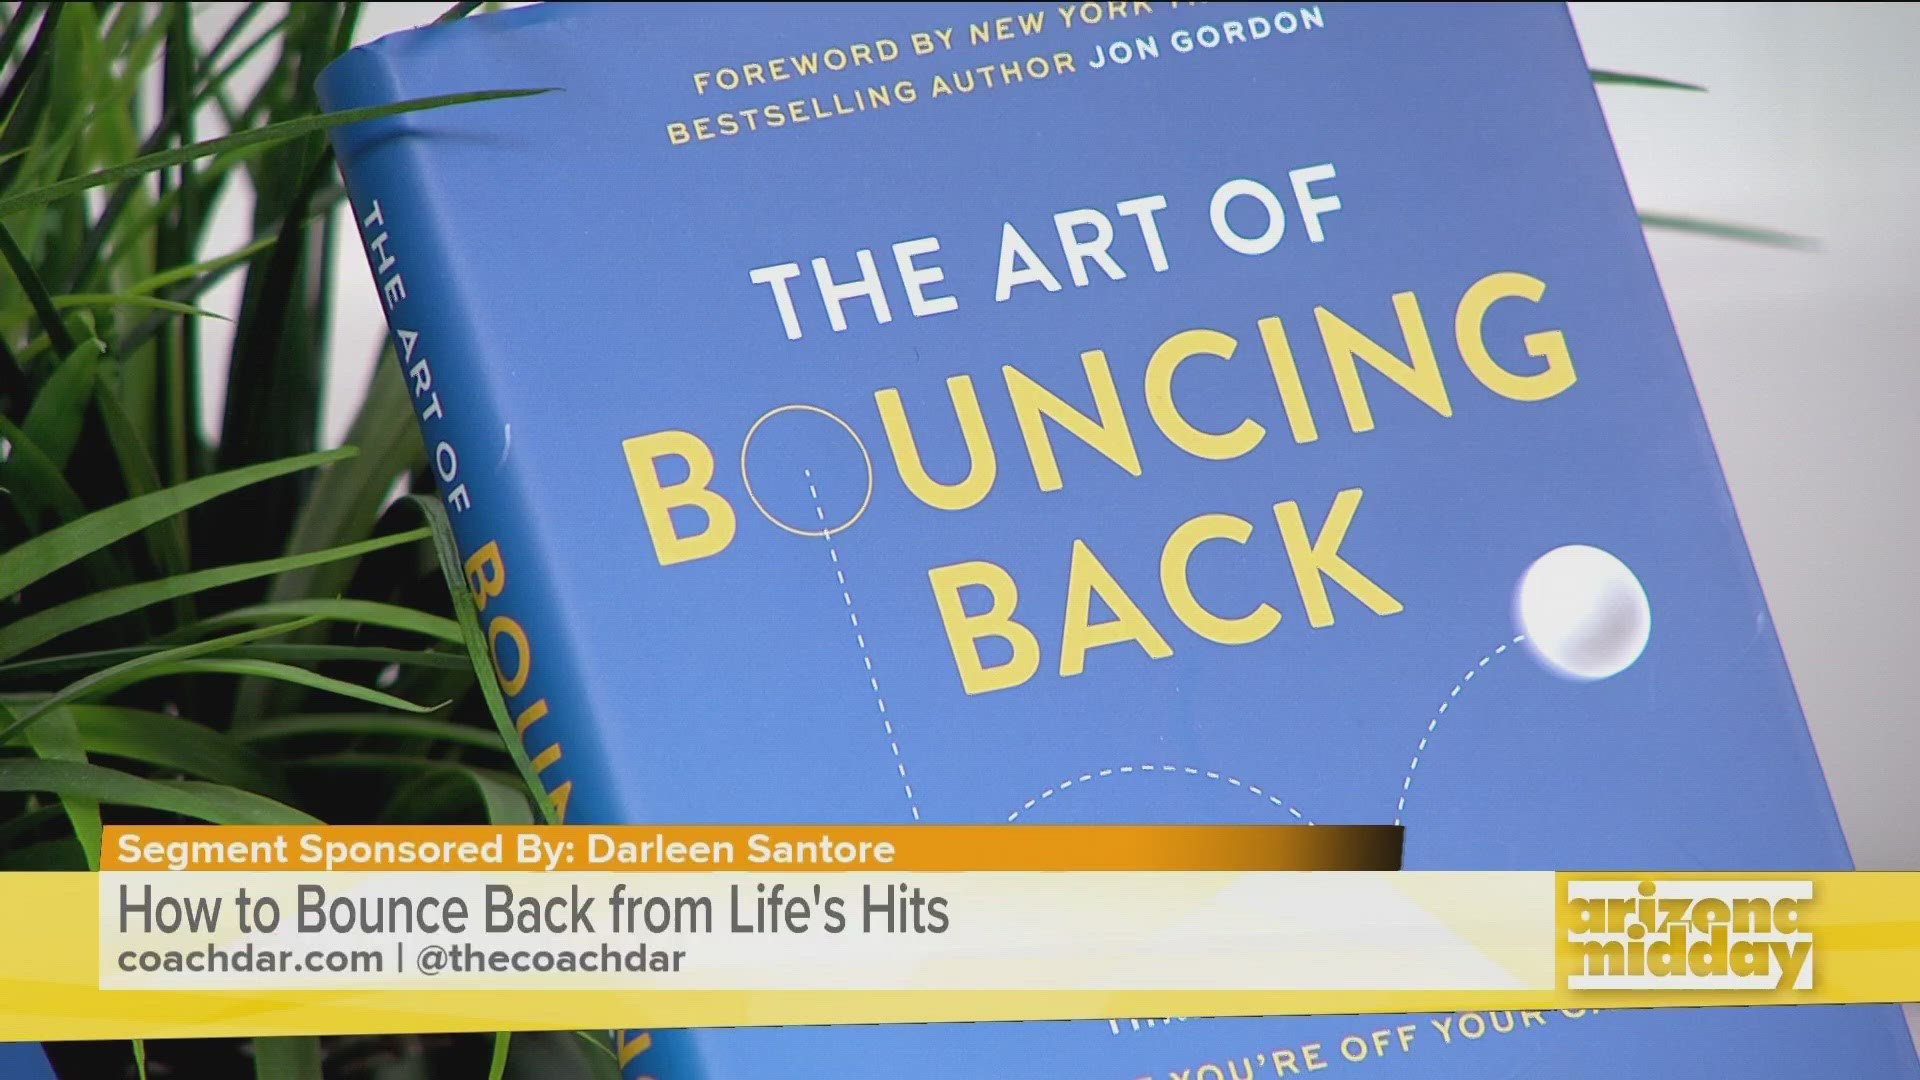 Darleen Santore used her life experiences to write her new book "The Art of Bouncing Back." Her hope is to help others "bounce back" faster from life's adversities.